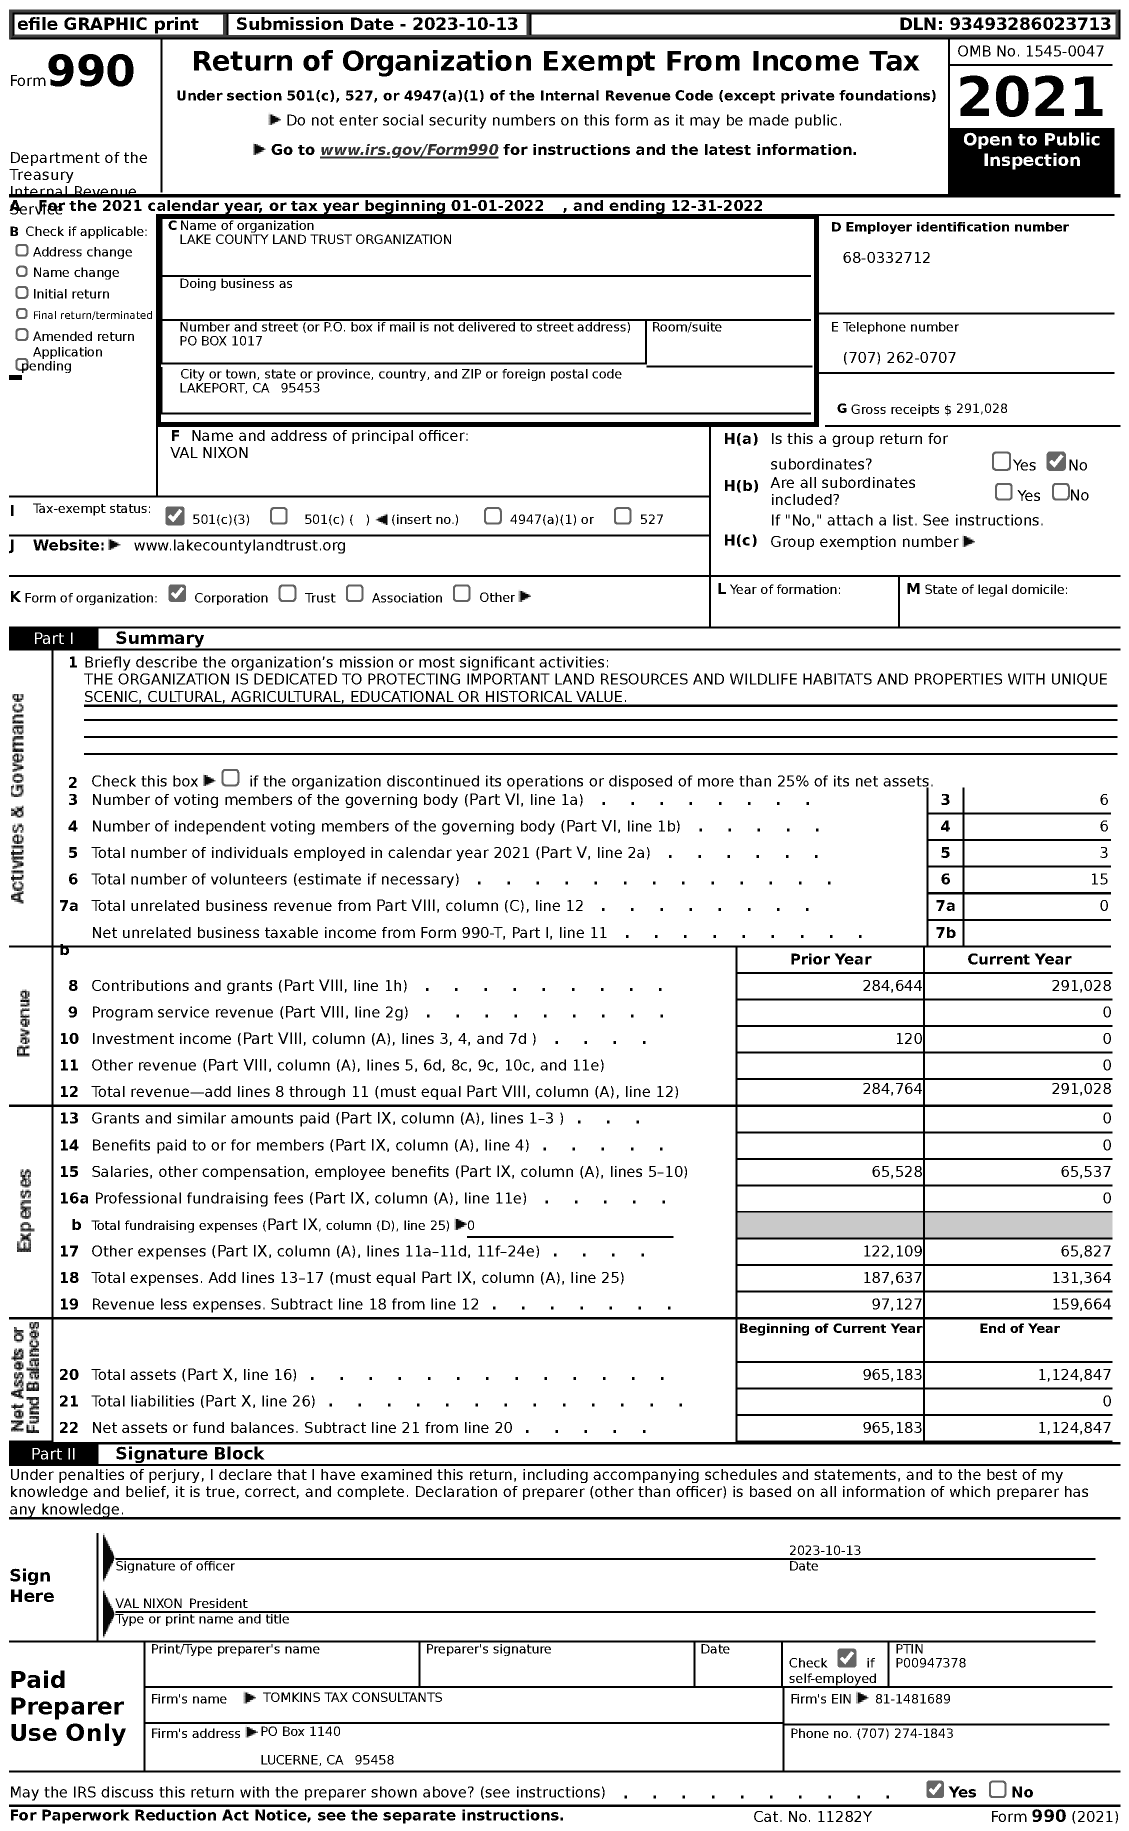 Image of first page of 2022 Form 990 for Lake County Land Trust Organization